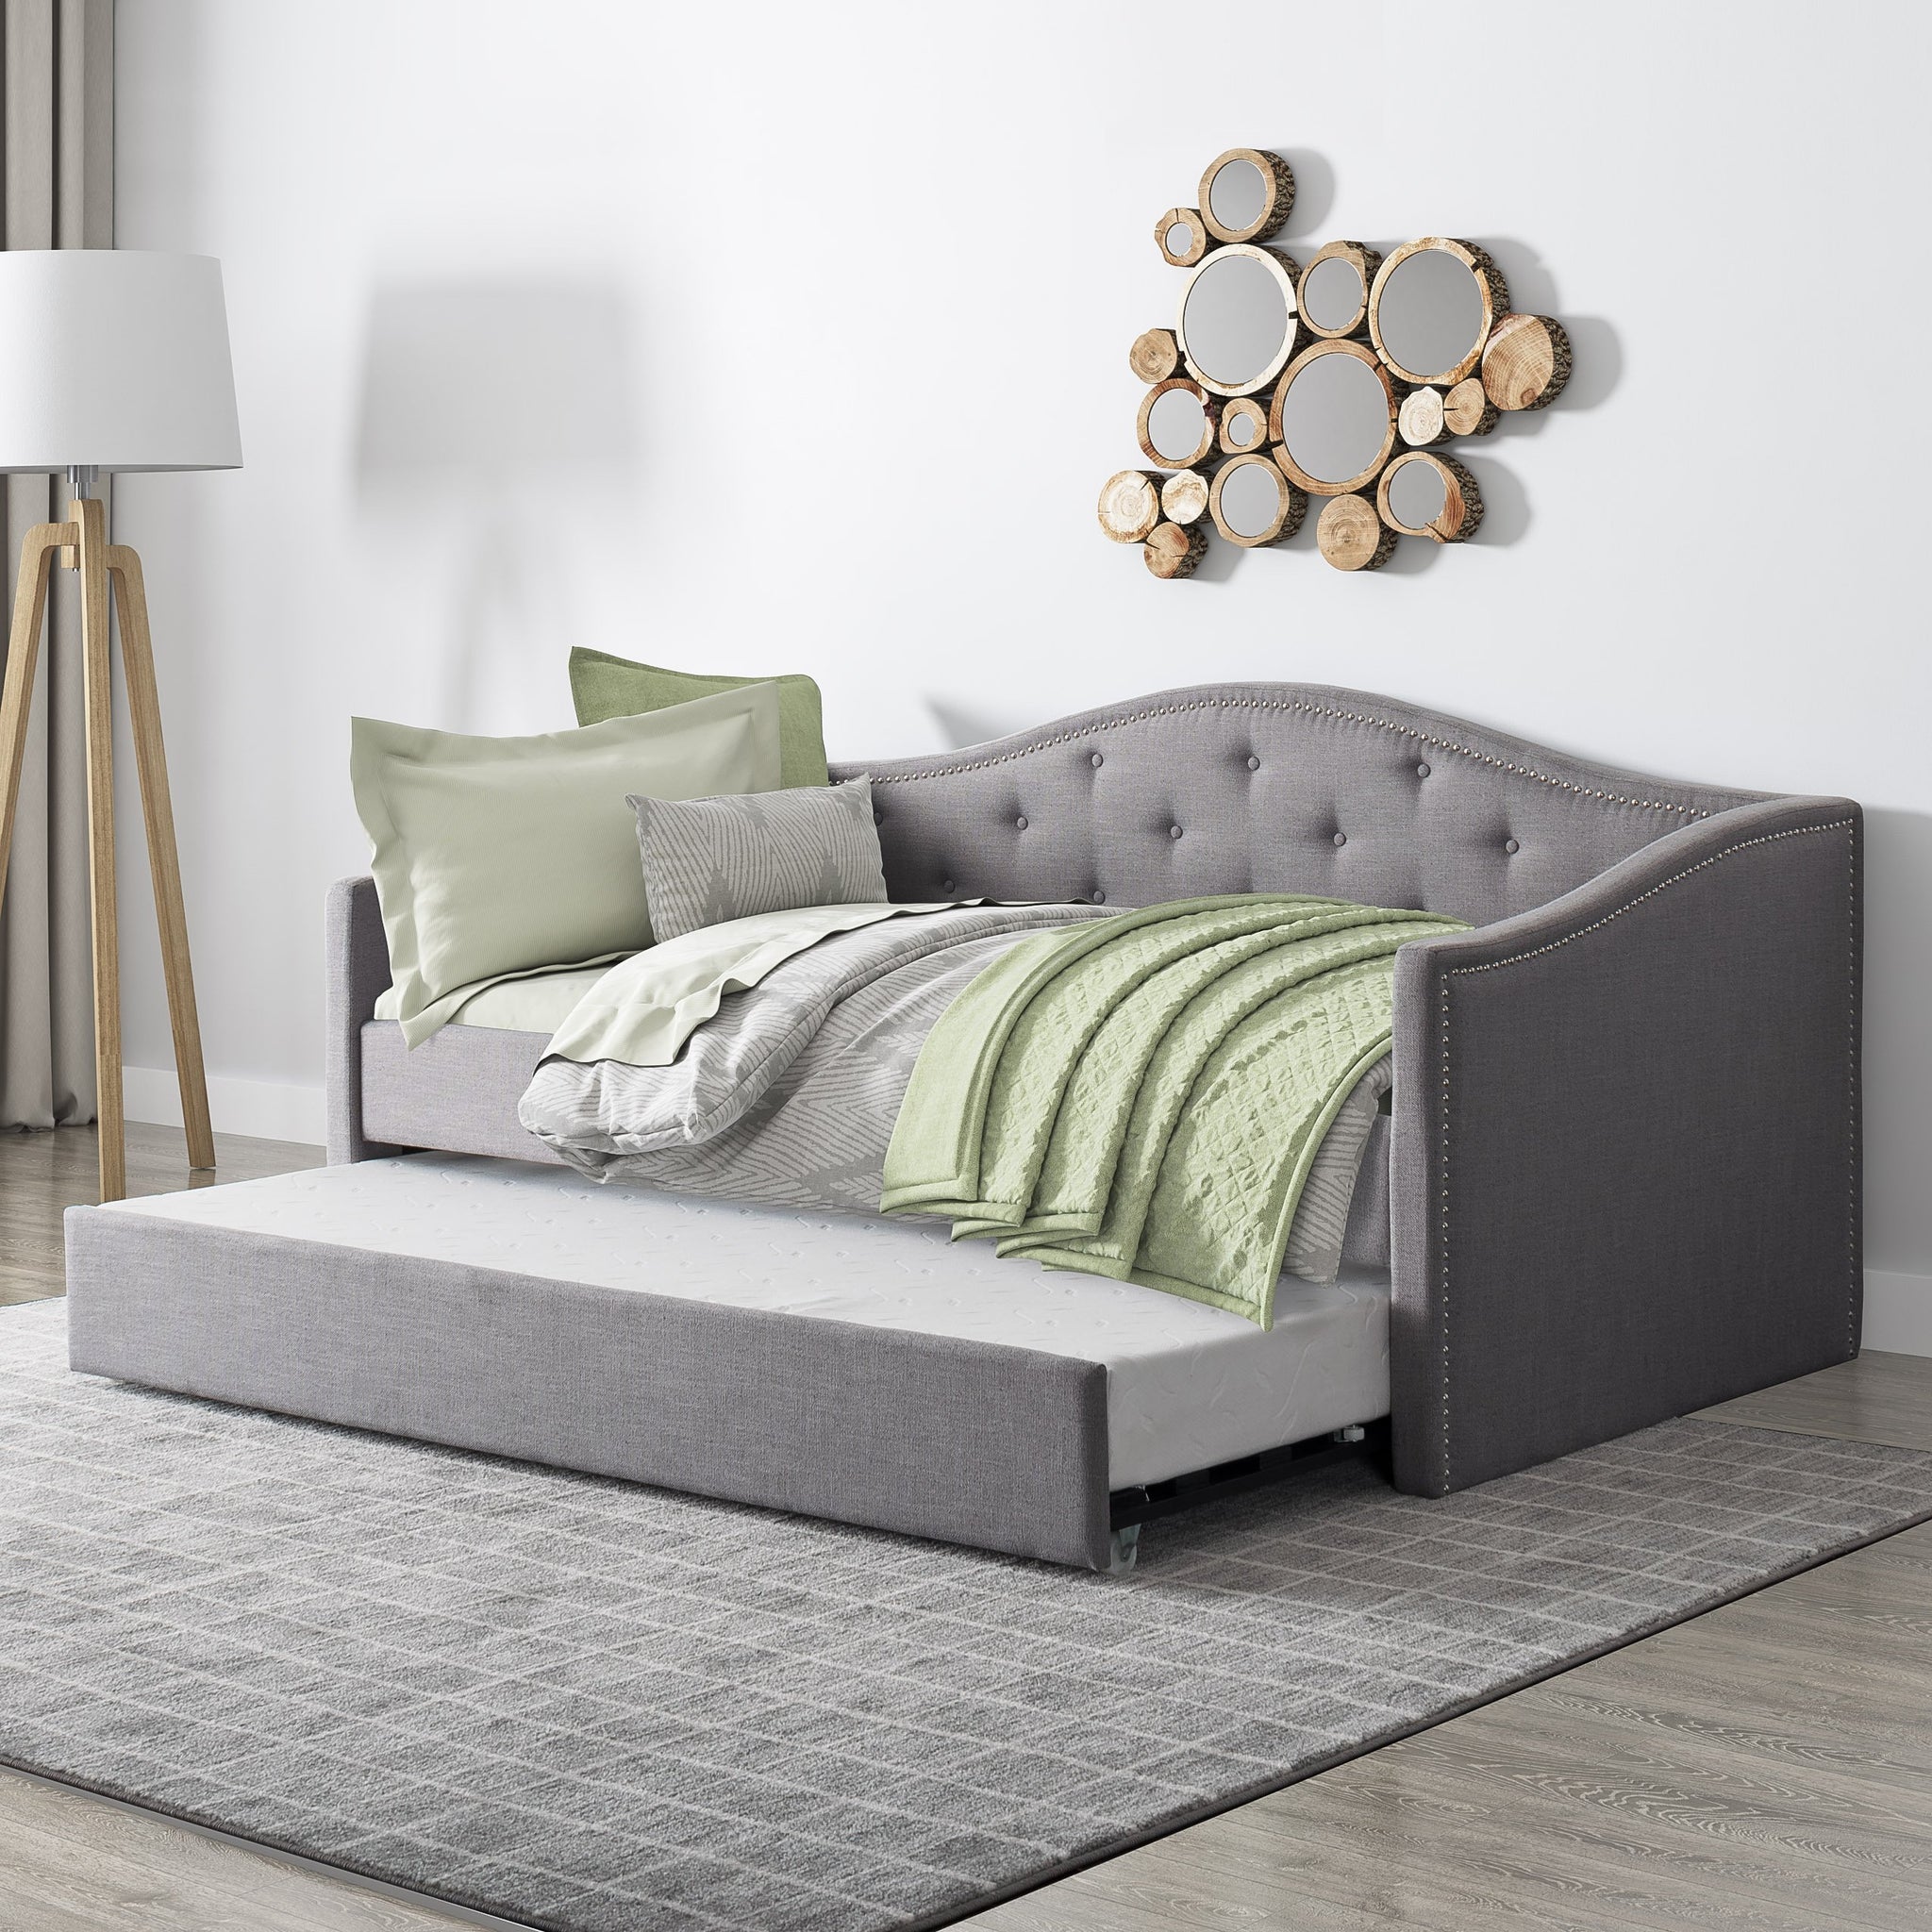 Fairfield Tufted Fabric Day Bed with Trundle and Mattresses, Twin 